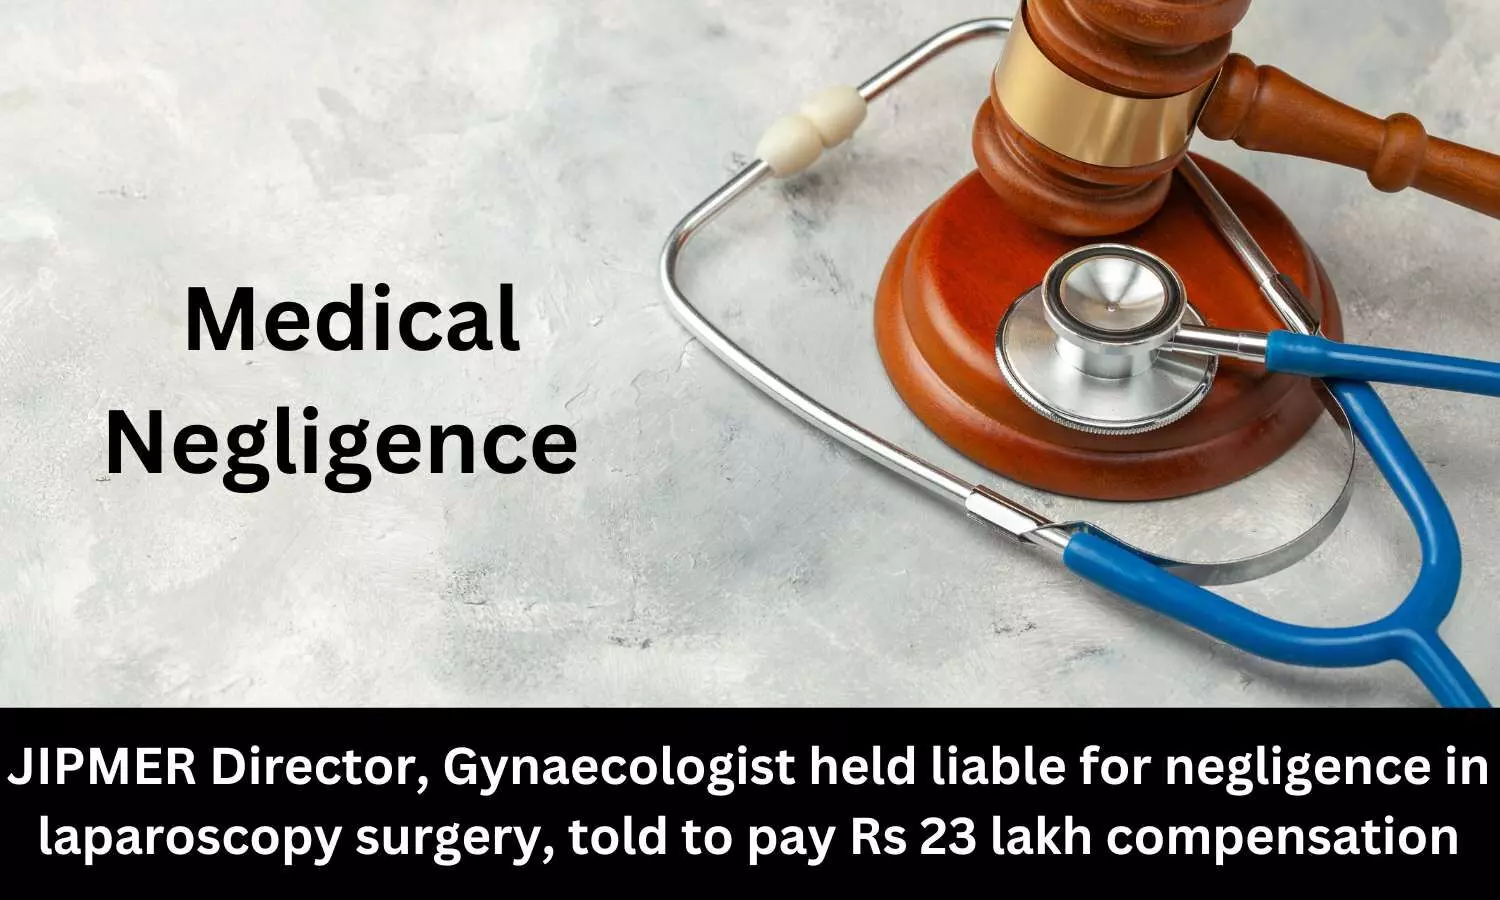 JIPMER Director, Gynaecologist held liable for negligence in laparoscopy surgery, told to pay Rs 23 lakh compensation